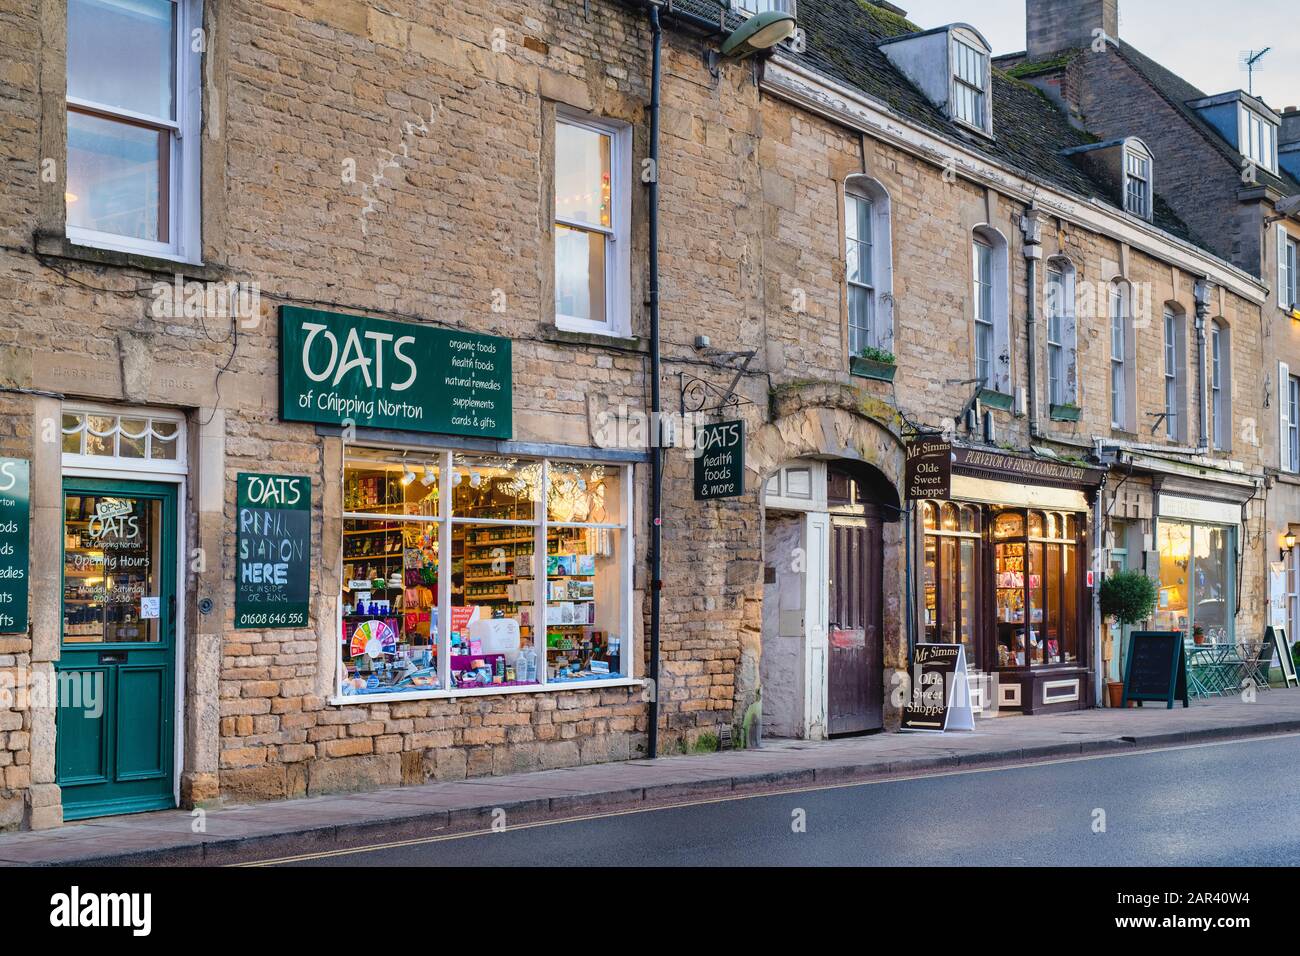 Oats health food shop, Old Sweet Shop and The Tea Set tea room in Chipping Norton. Cotswolds, Oxfordshire, England Stock Photo